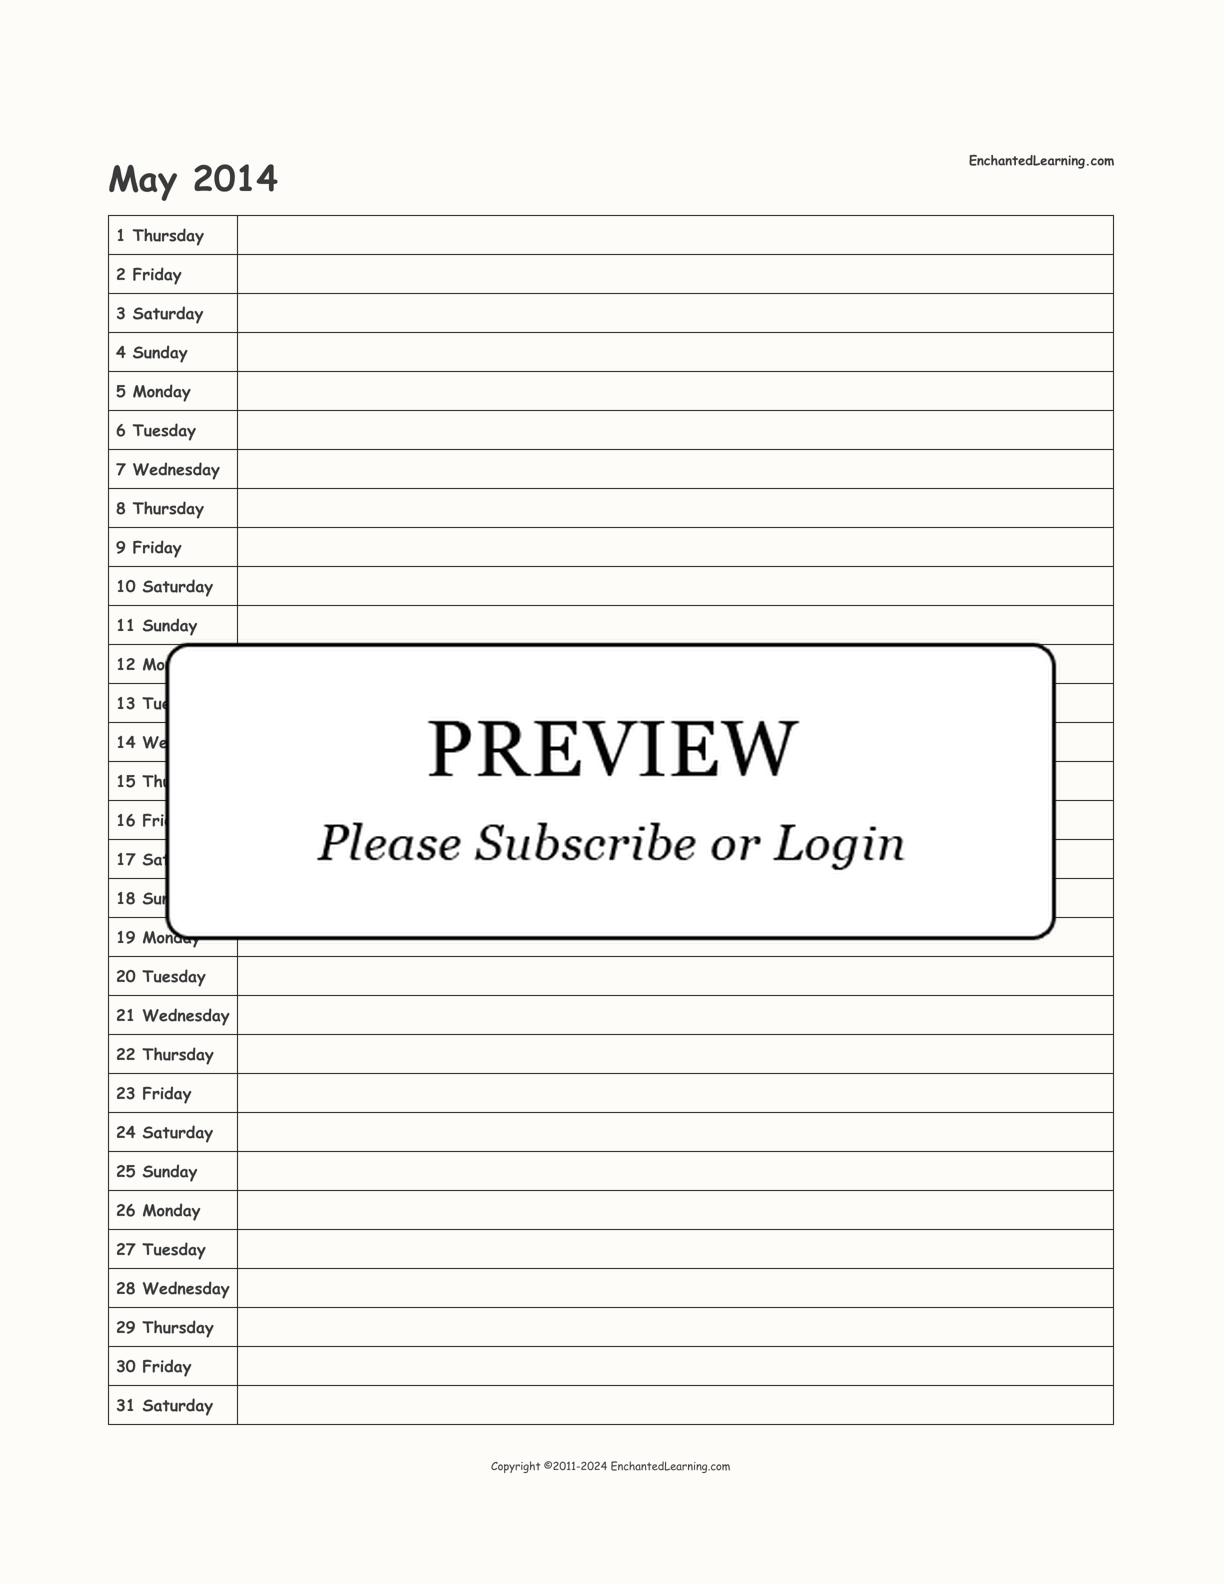 2014 Scheduling Calendar interactive printout page 5